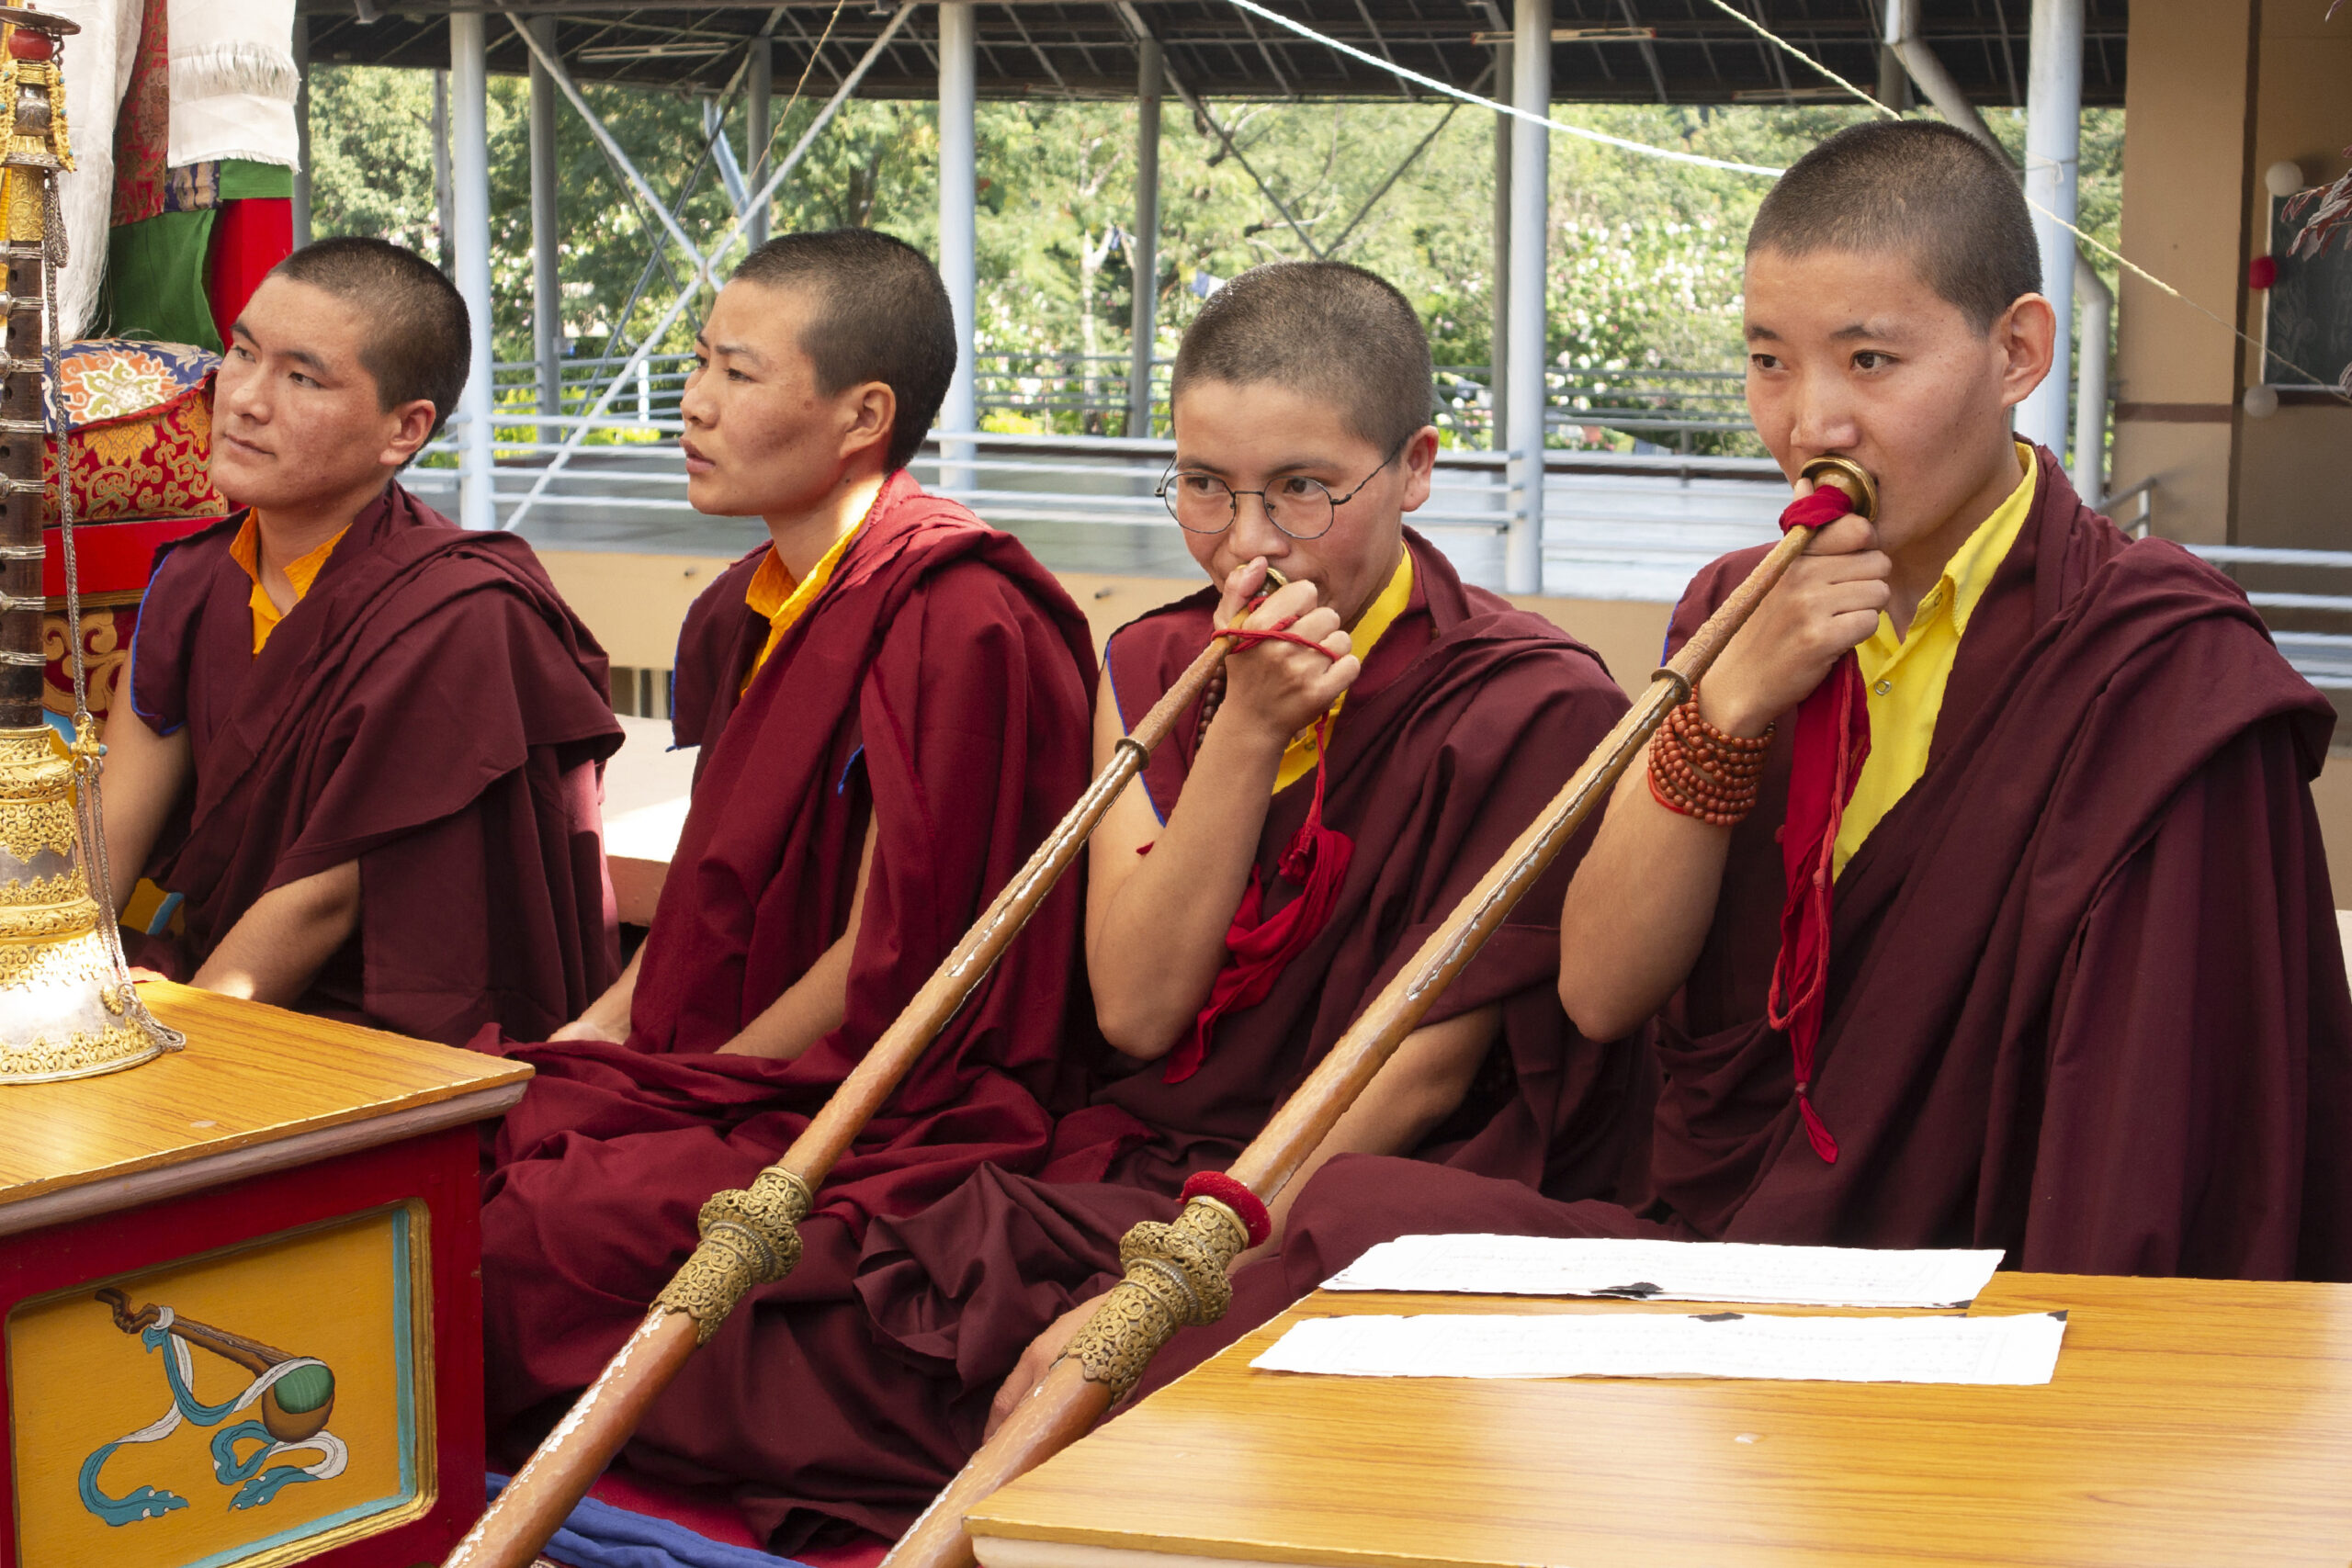 In this photo provided by the Dongyu Gatsal Ling nunnery, a group of nuns play a ritual instrument, the Tibetan longhorn, or dungchen, which are commonly used during ceremonies, at the nunnery in the state of Himachal Pradesh, India on Oct. 27, 2021. About 100 nuns live and study here. (Dongyu Gatsal Ling nunnery via AP)